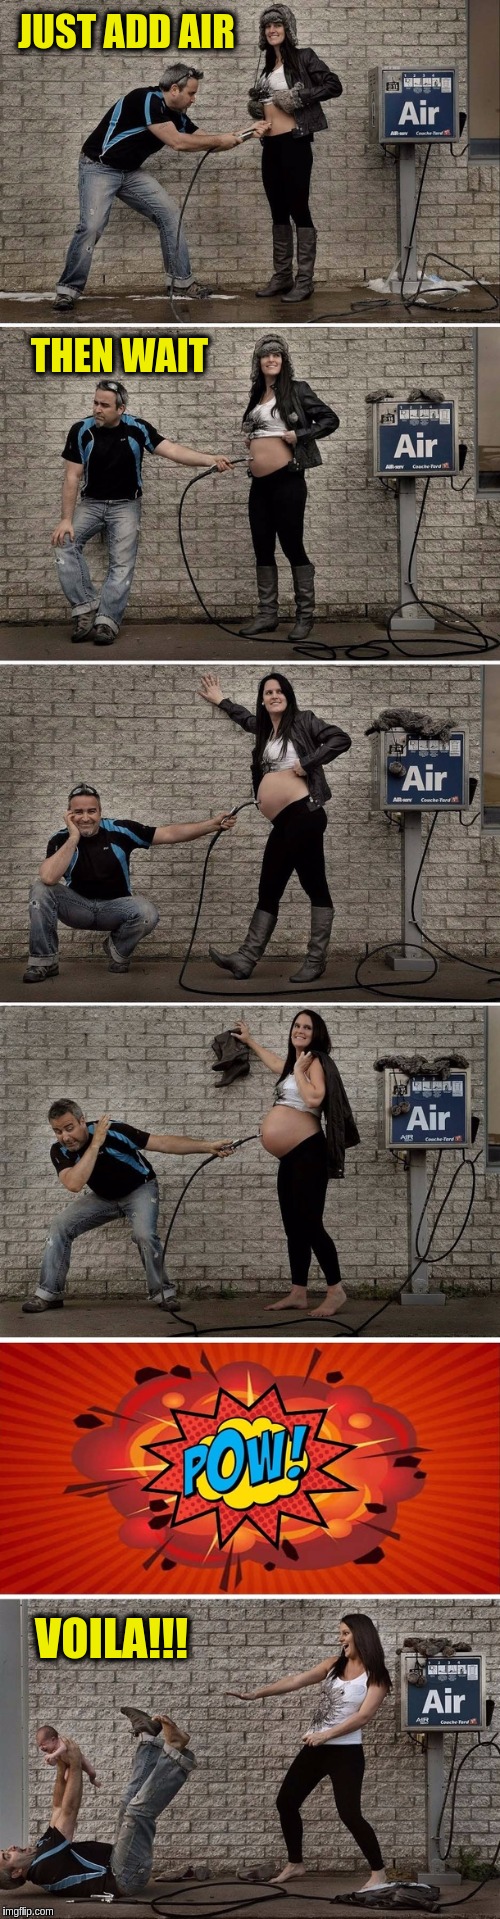 Watch as a Miracle Happens!!! ٩(˘◡˘)۶ | JUST ADD AIR; THEN WAIT; VOILA!!! | image tagged in memes,funny,miracles,child birth,air pump,babies | made w/ Imgflip meme maker